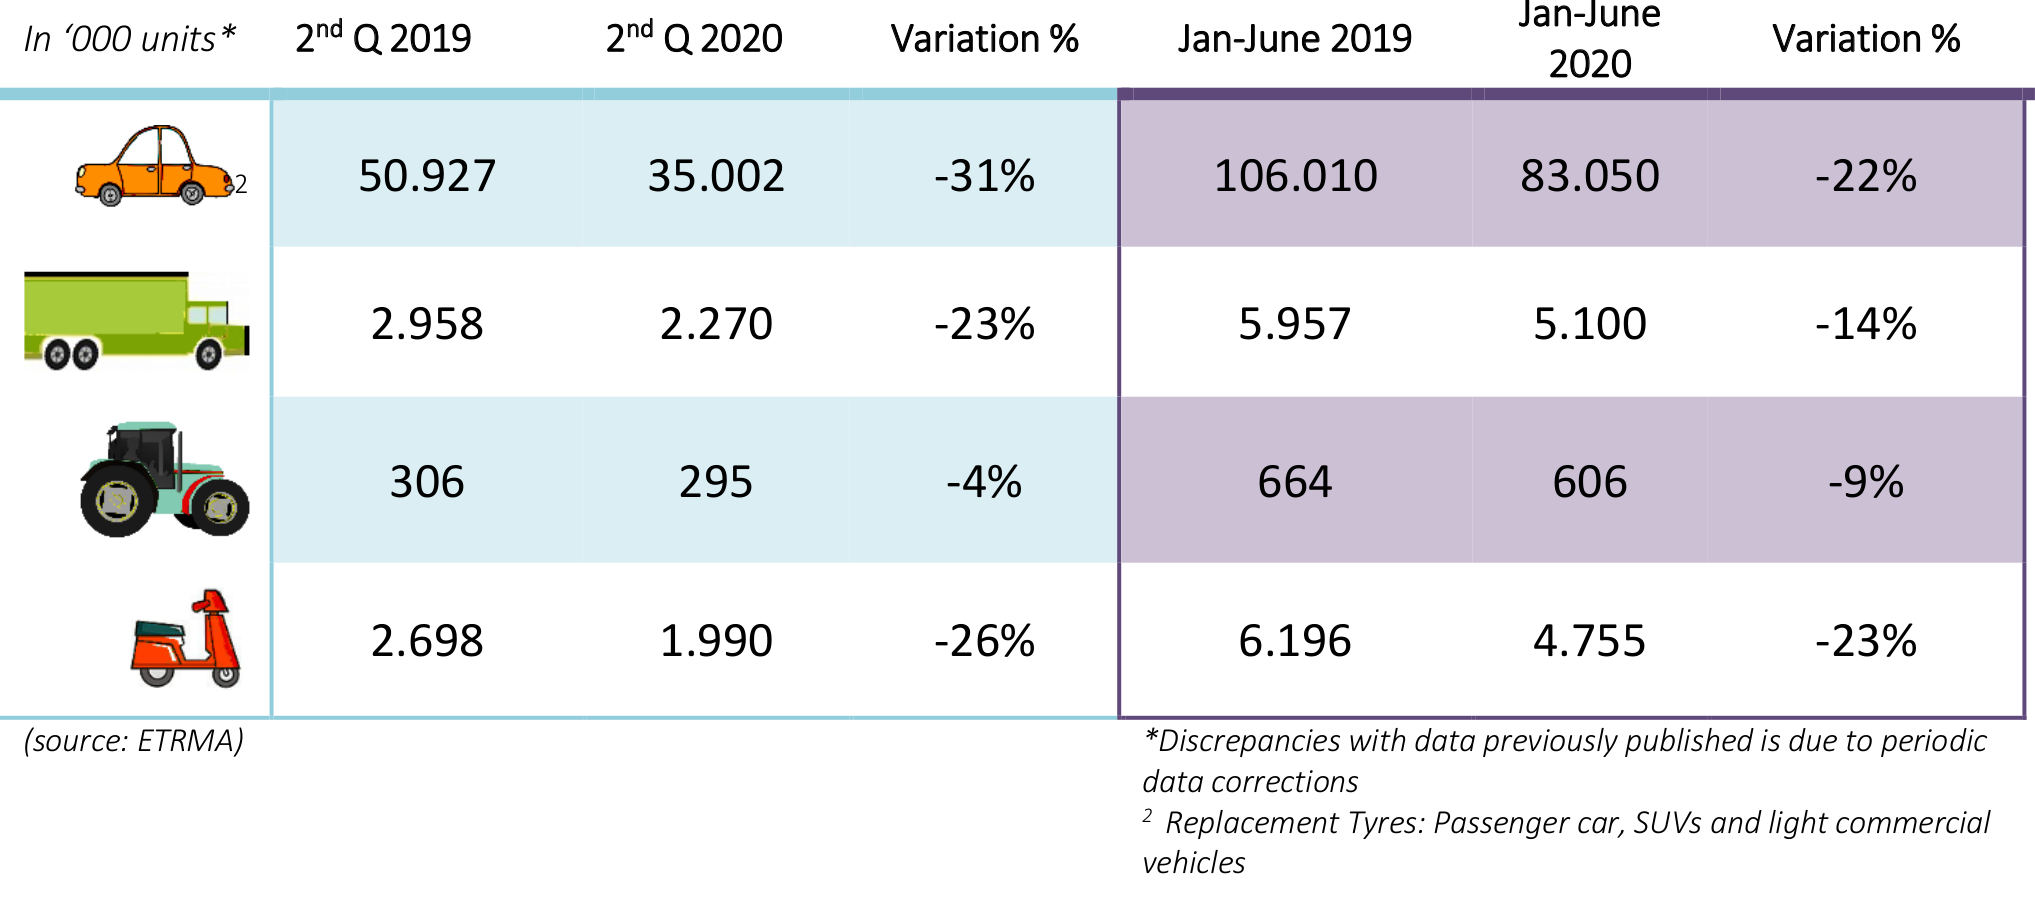 ETRMA data confirms steep drop in replacement tyre sales